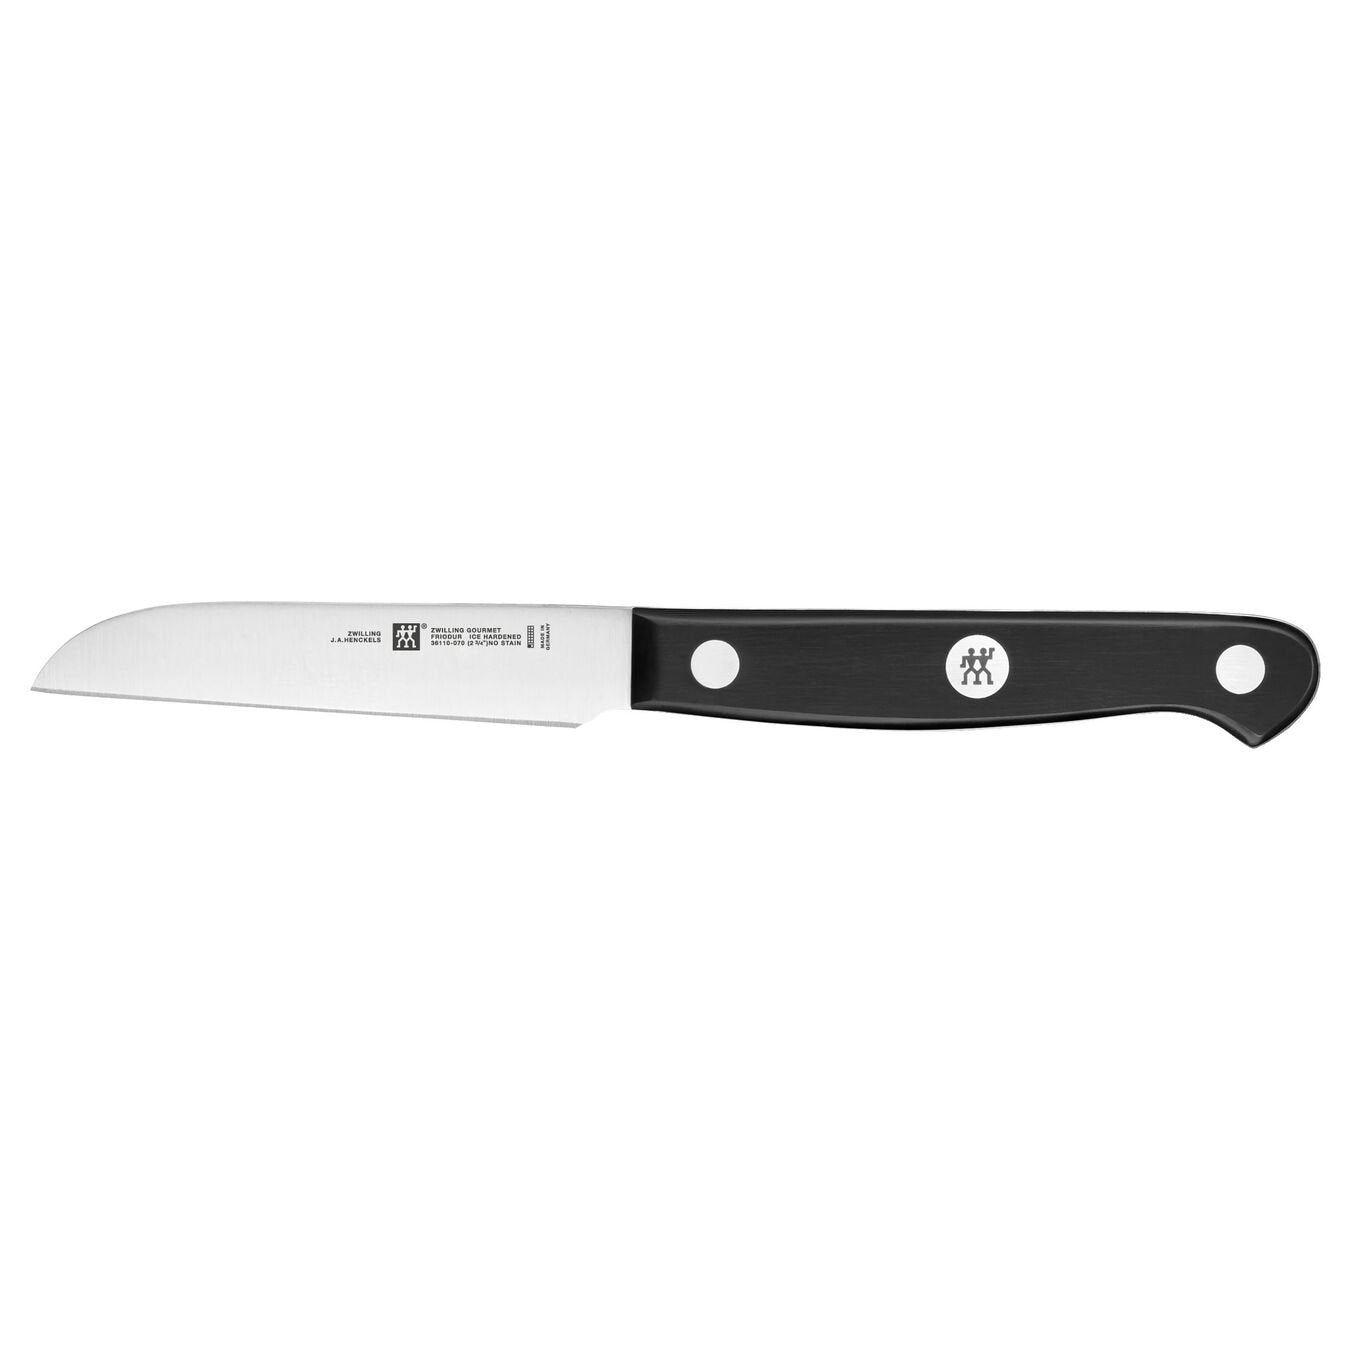 short blade knife with riveted black handle on white background